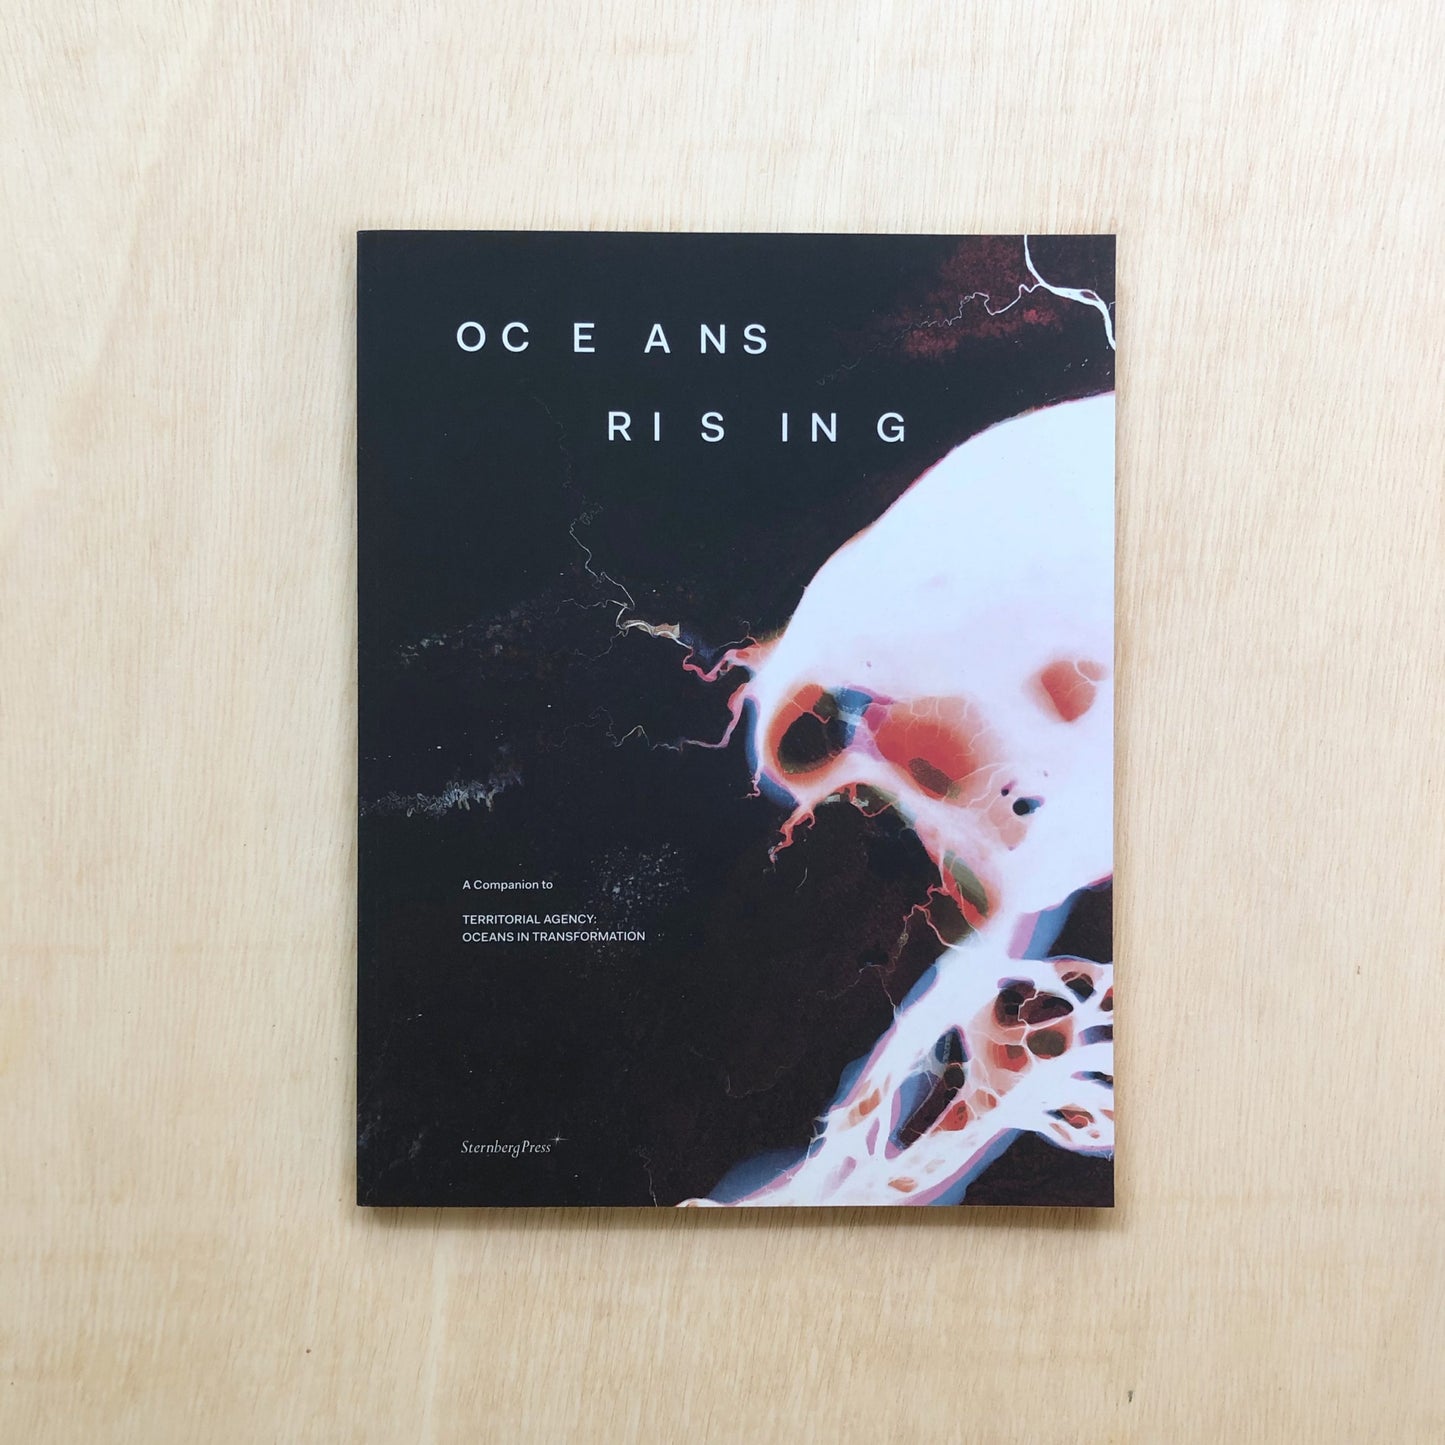 Oceans Rising - A Companion to “Territorial Agency: Oceans in